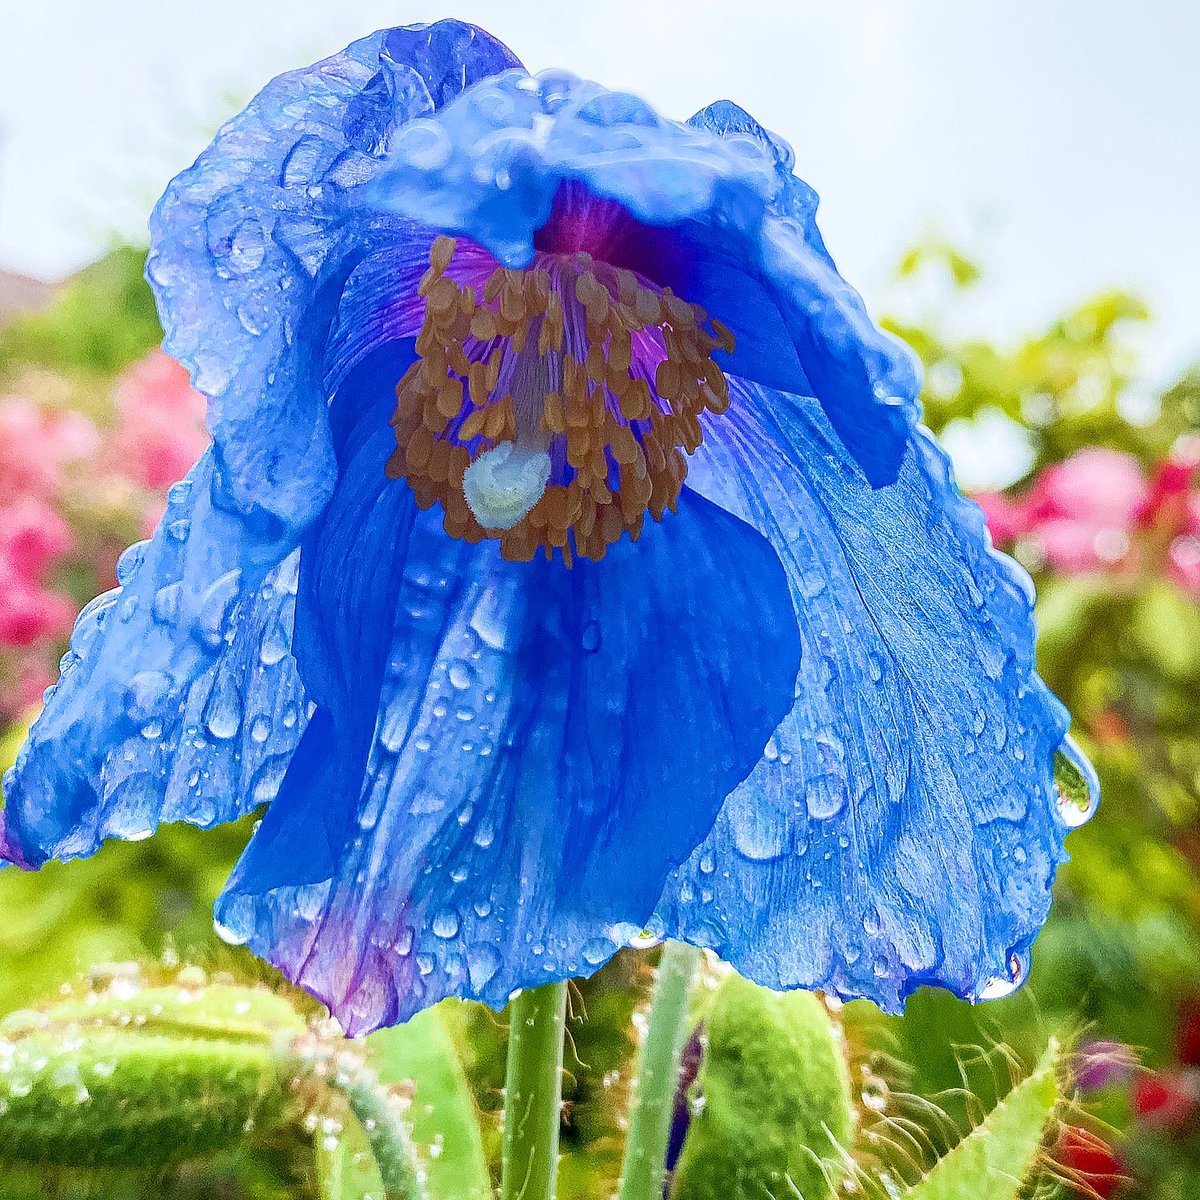 Meconopsis grandis on a rainy day - in our May garden. #mygarden #meconopsis #gardenvibes #flowers